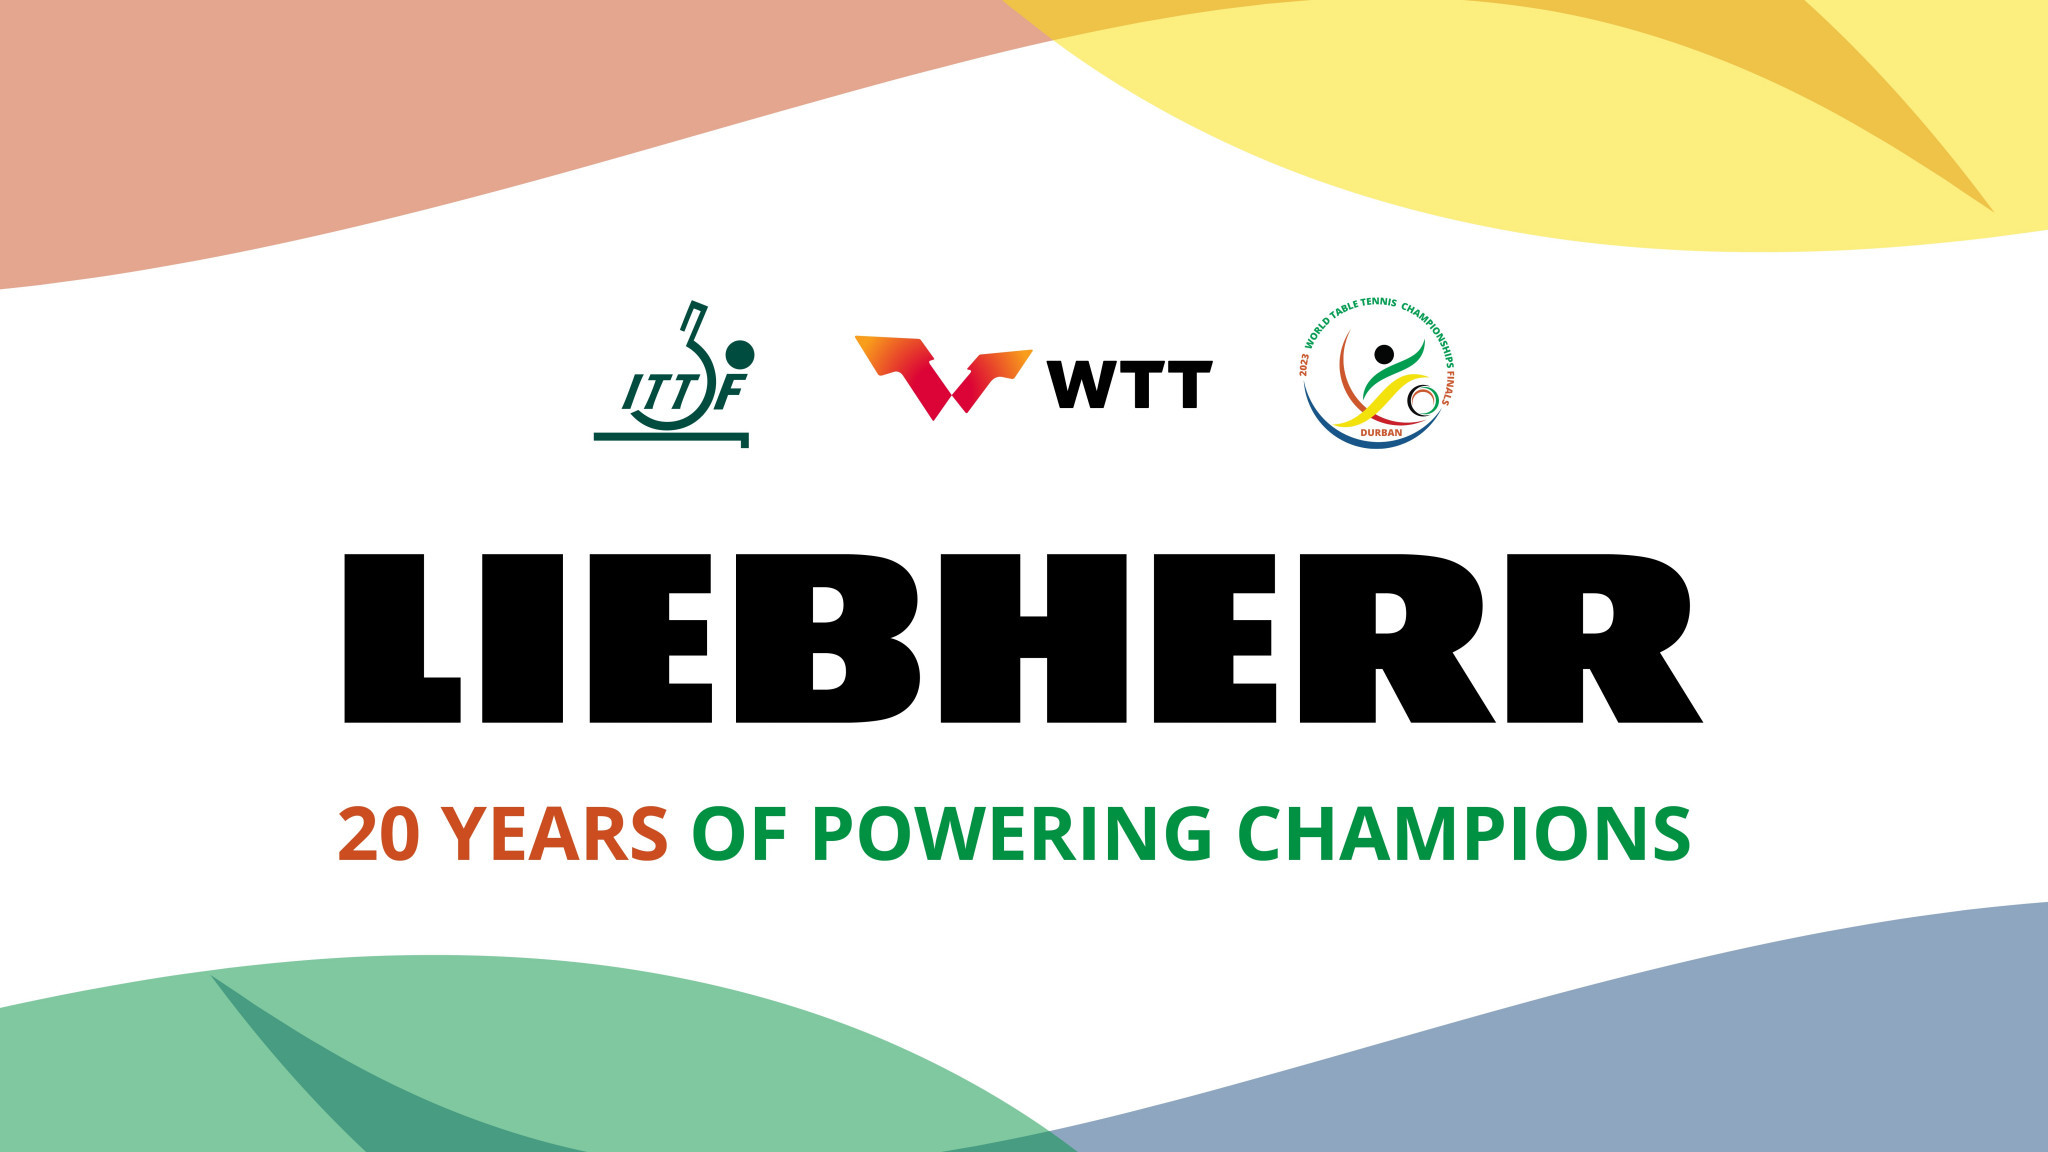 Liebherr has been a partner of the ITTF for 20 years ©WTT